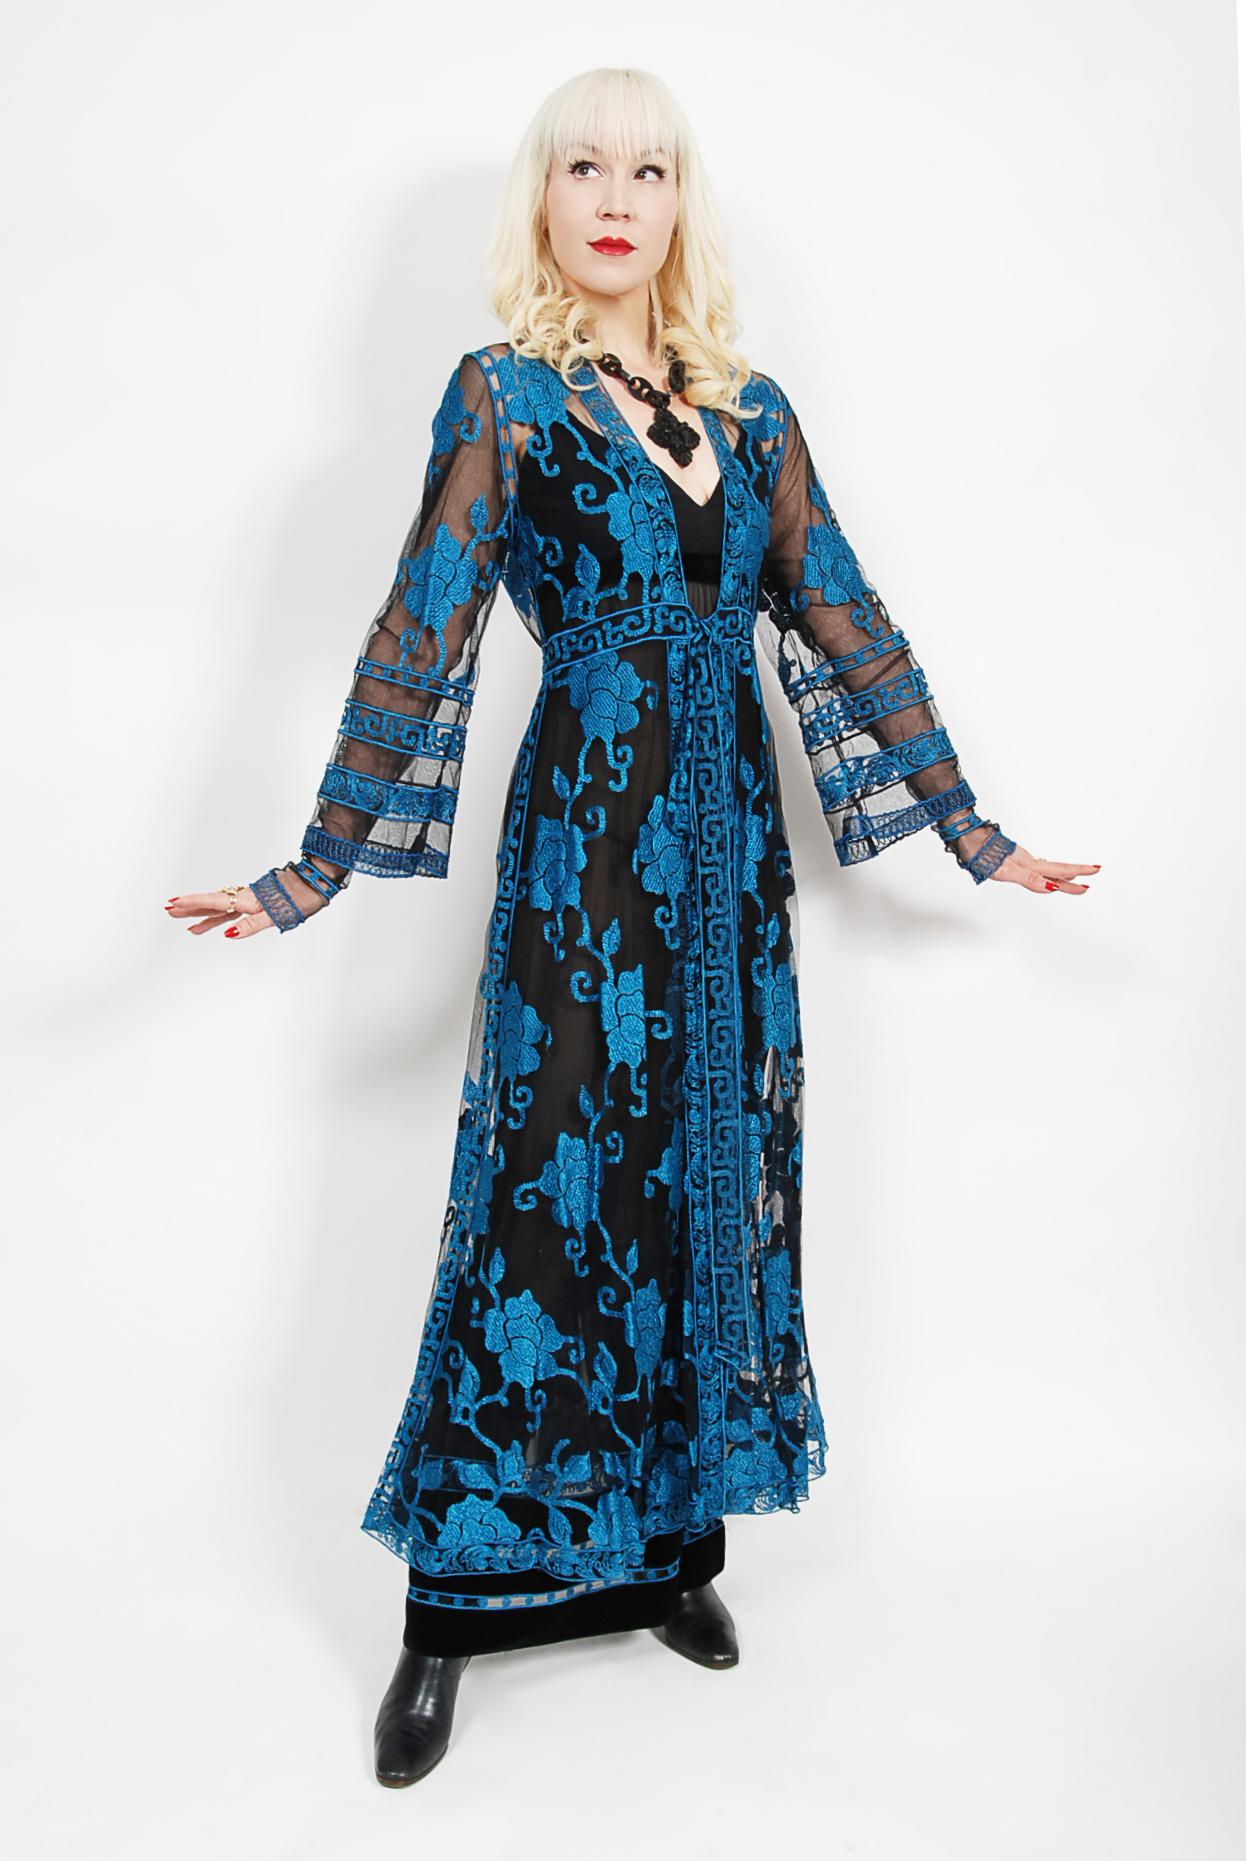 This magnificent and highly coveted 1994 Chloe fall-winter collection runway embroidered blue roses sheer-net gown ensemble is a perfect example of why Karl Lagerfeld's talent has stood the test of time. Karl Lagerfeld sadly passed away in 2019,